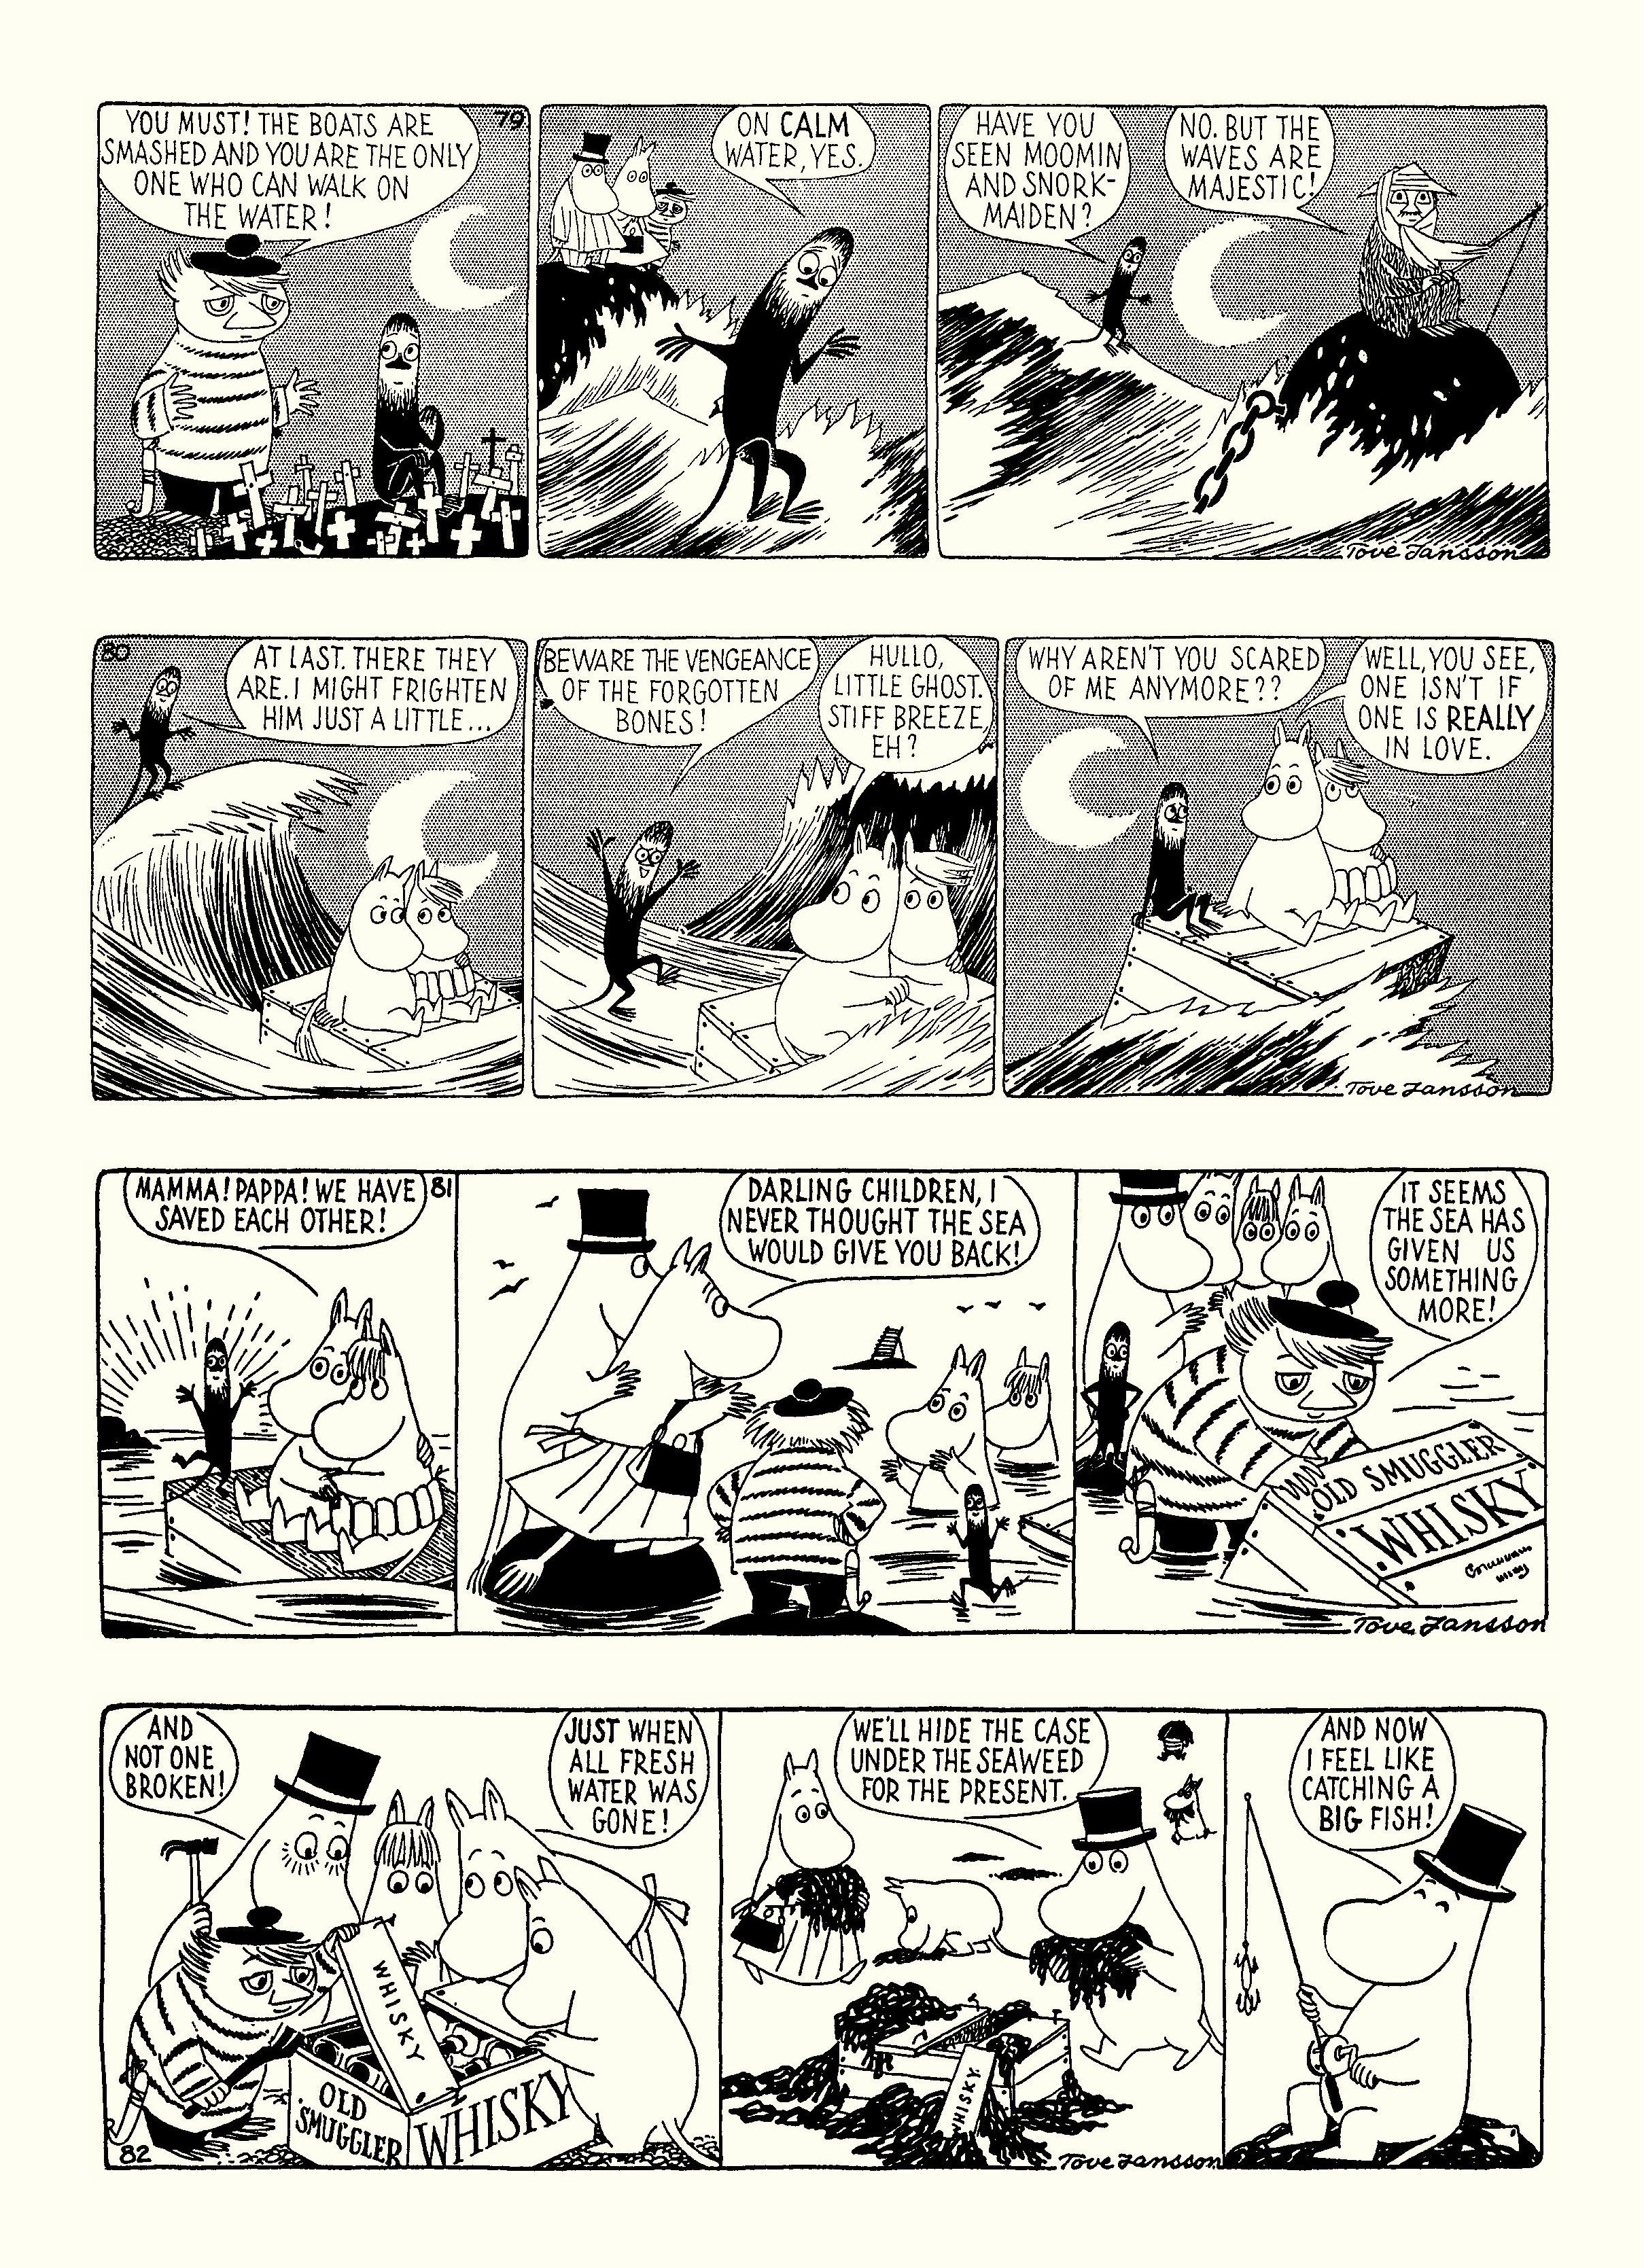 Read online Moomin: The Complete Tove Jansson Comic Strip comic -  Issue # TPB 3 - 75